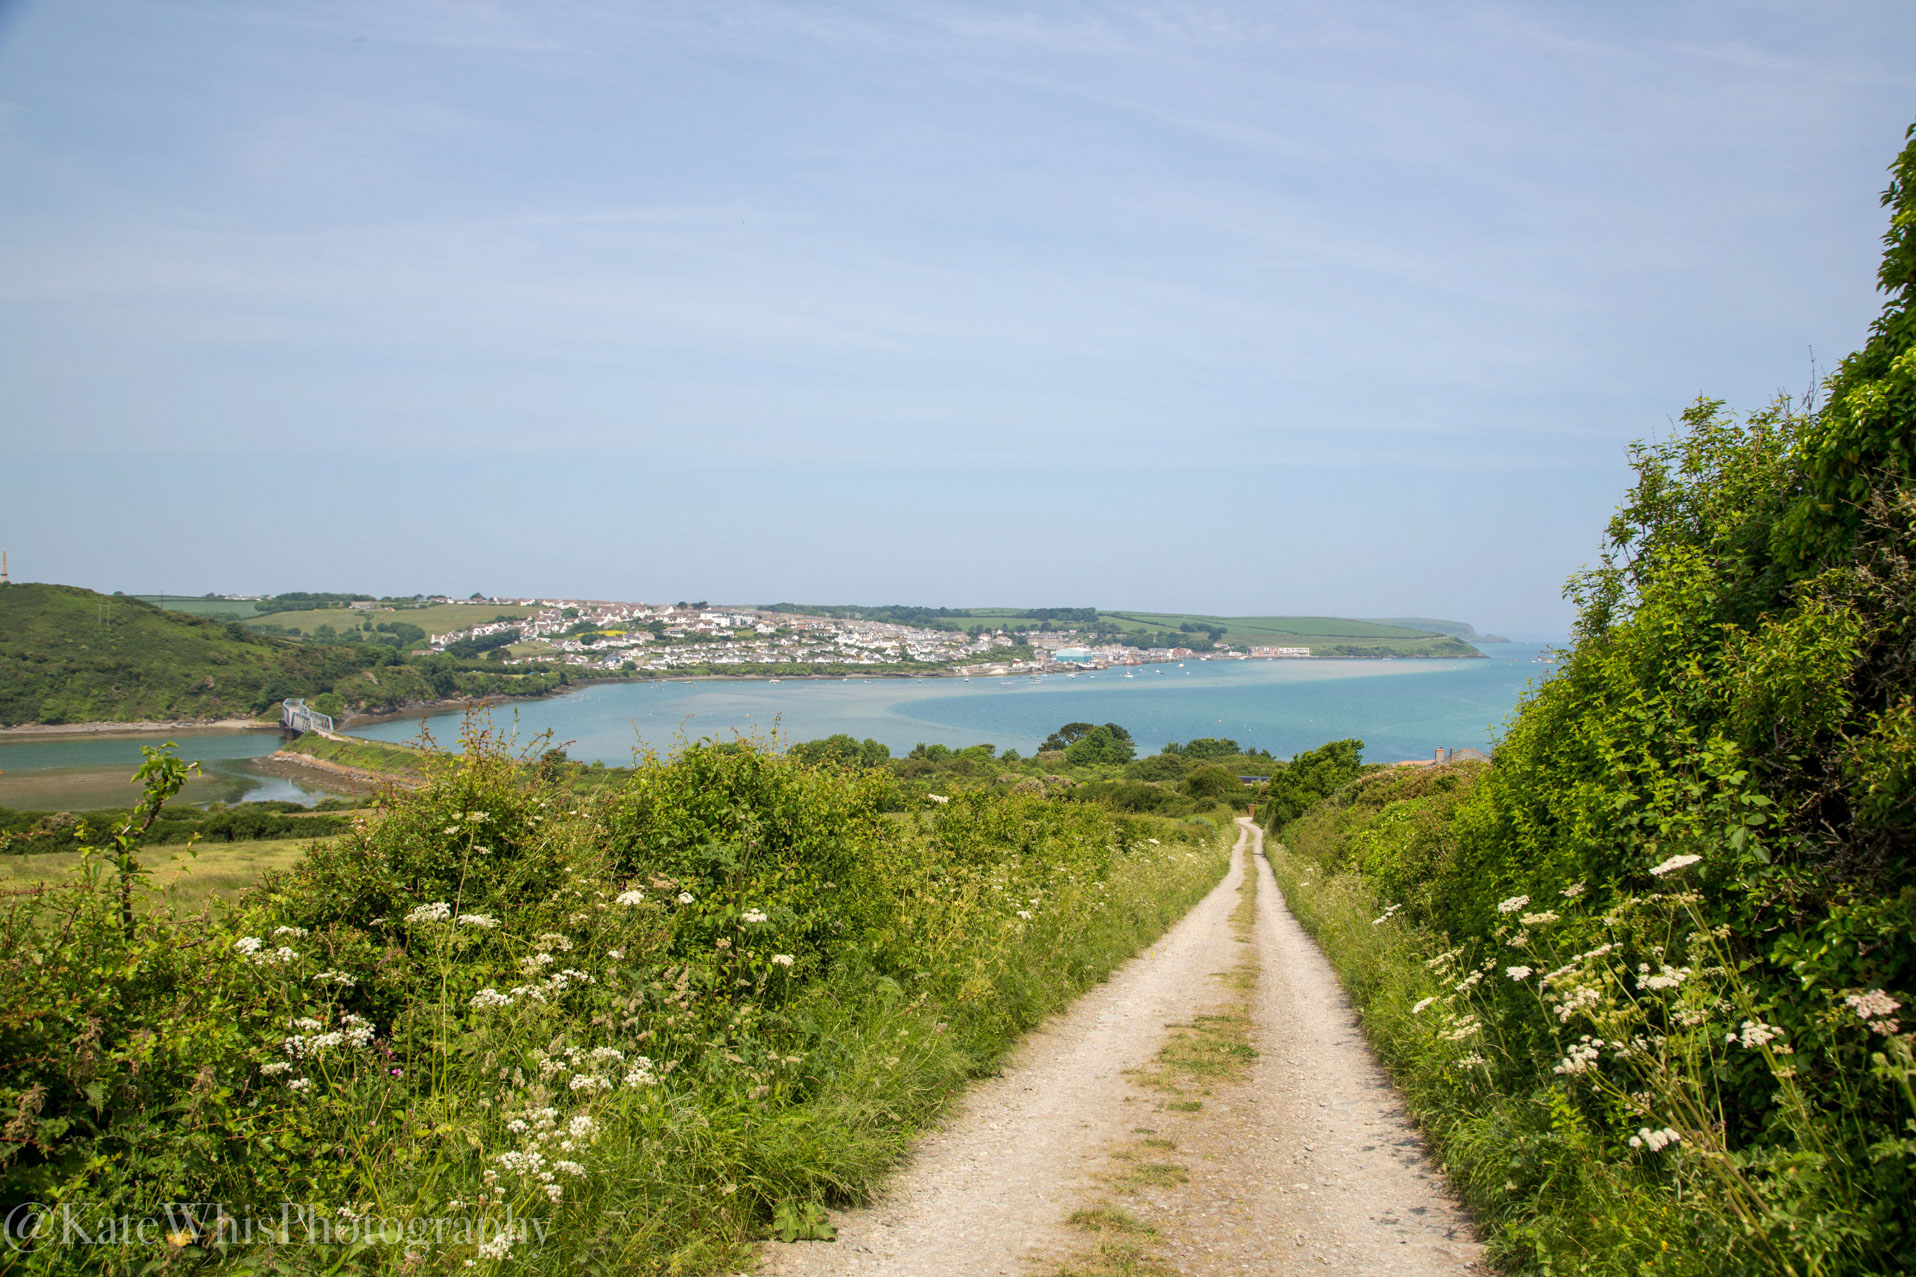 View from the track leading to the Camel Trail, over the Camel Estuary, Padstow and the Iron Bridge